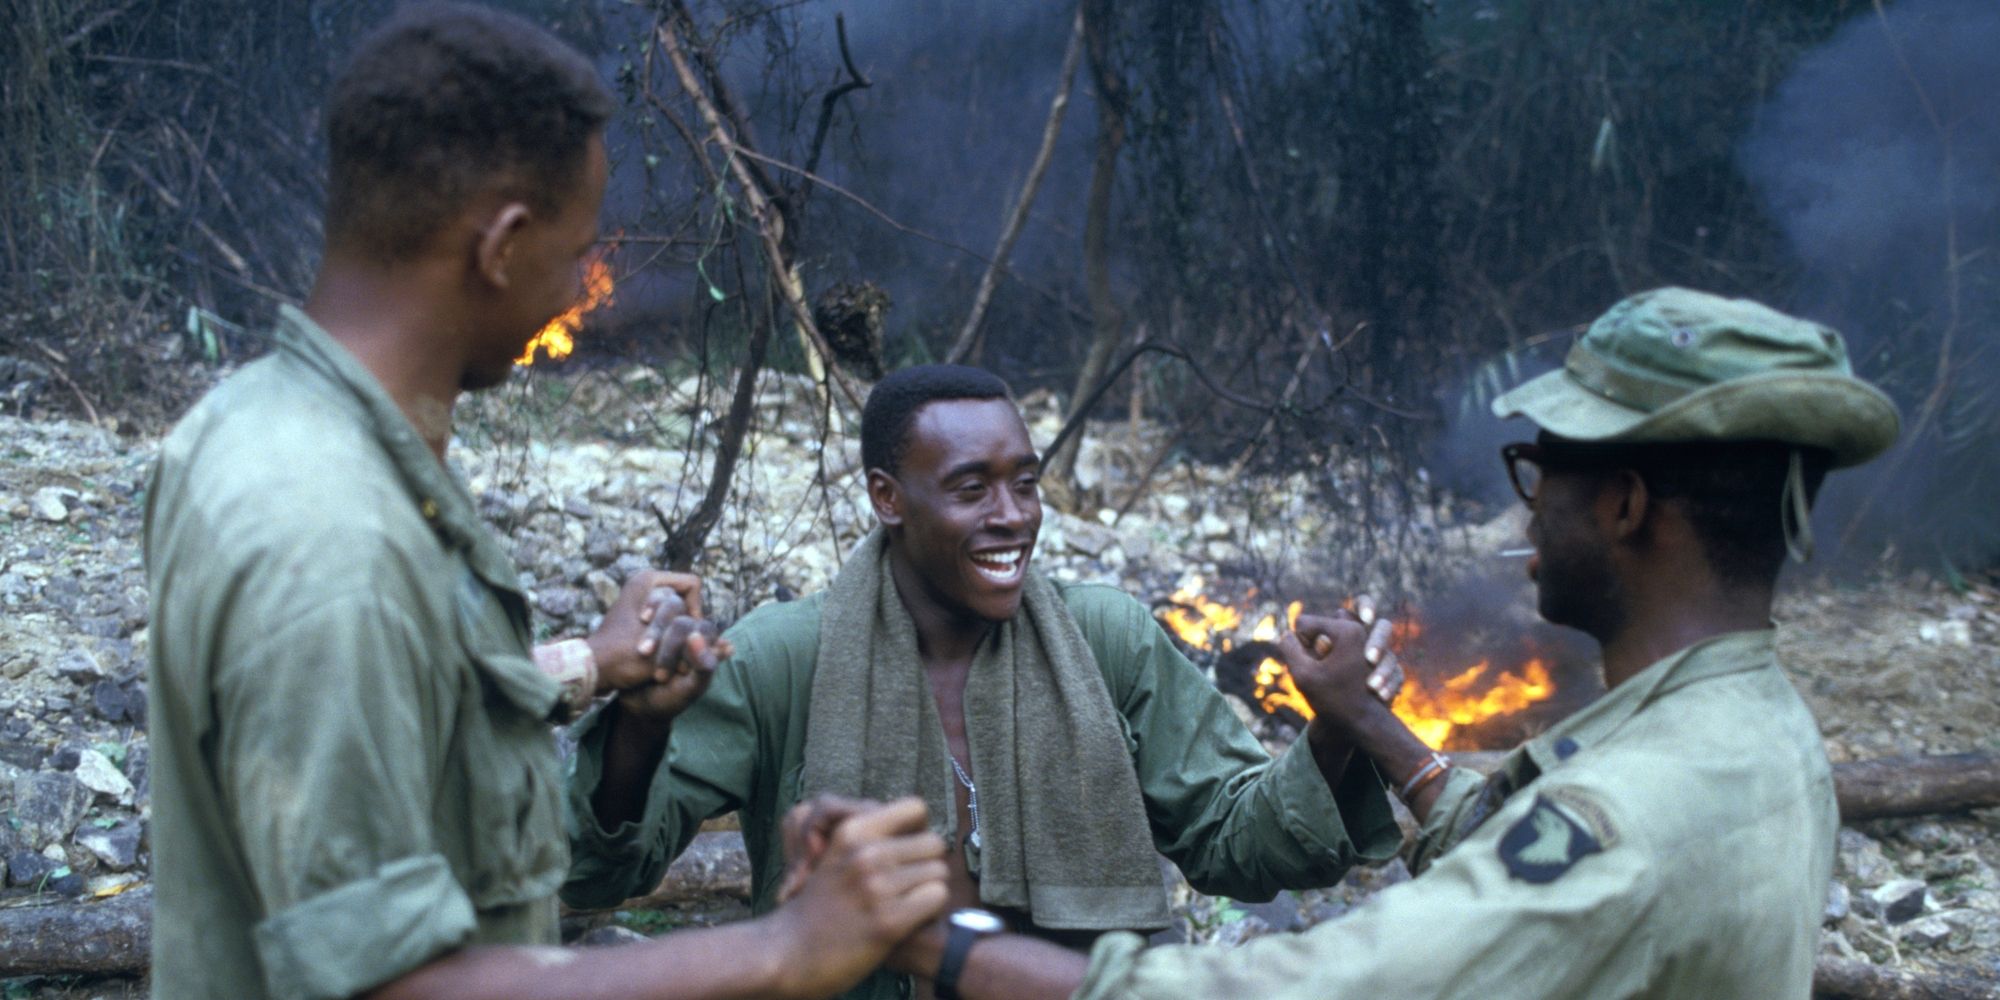 Michael Patrick Boatman as Motown, Don Cheadle as Wash, and Courtney B. Vance  as Doc in 'Hamburger Hill'